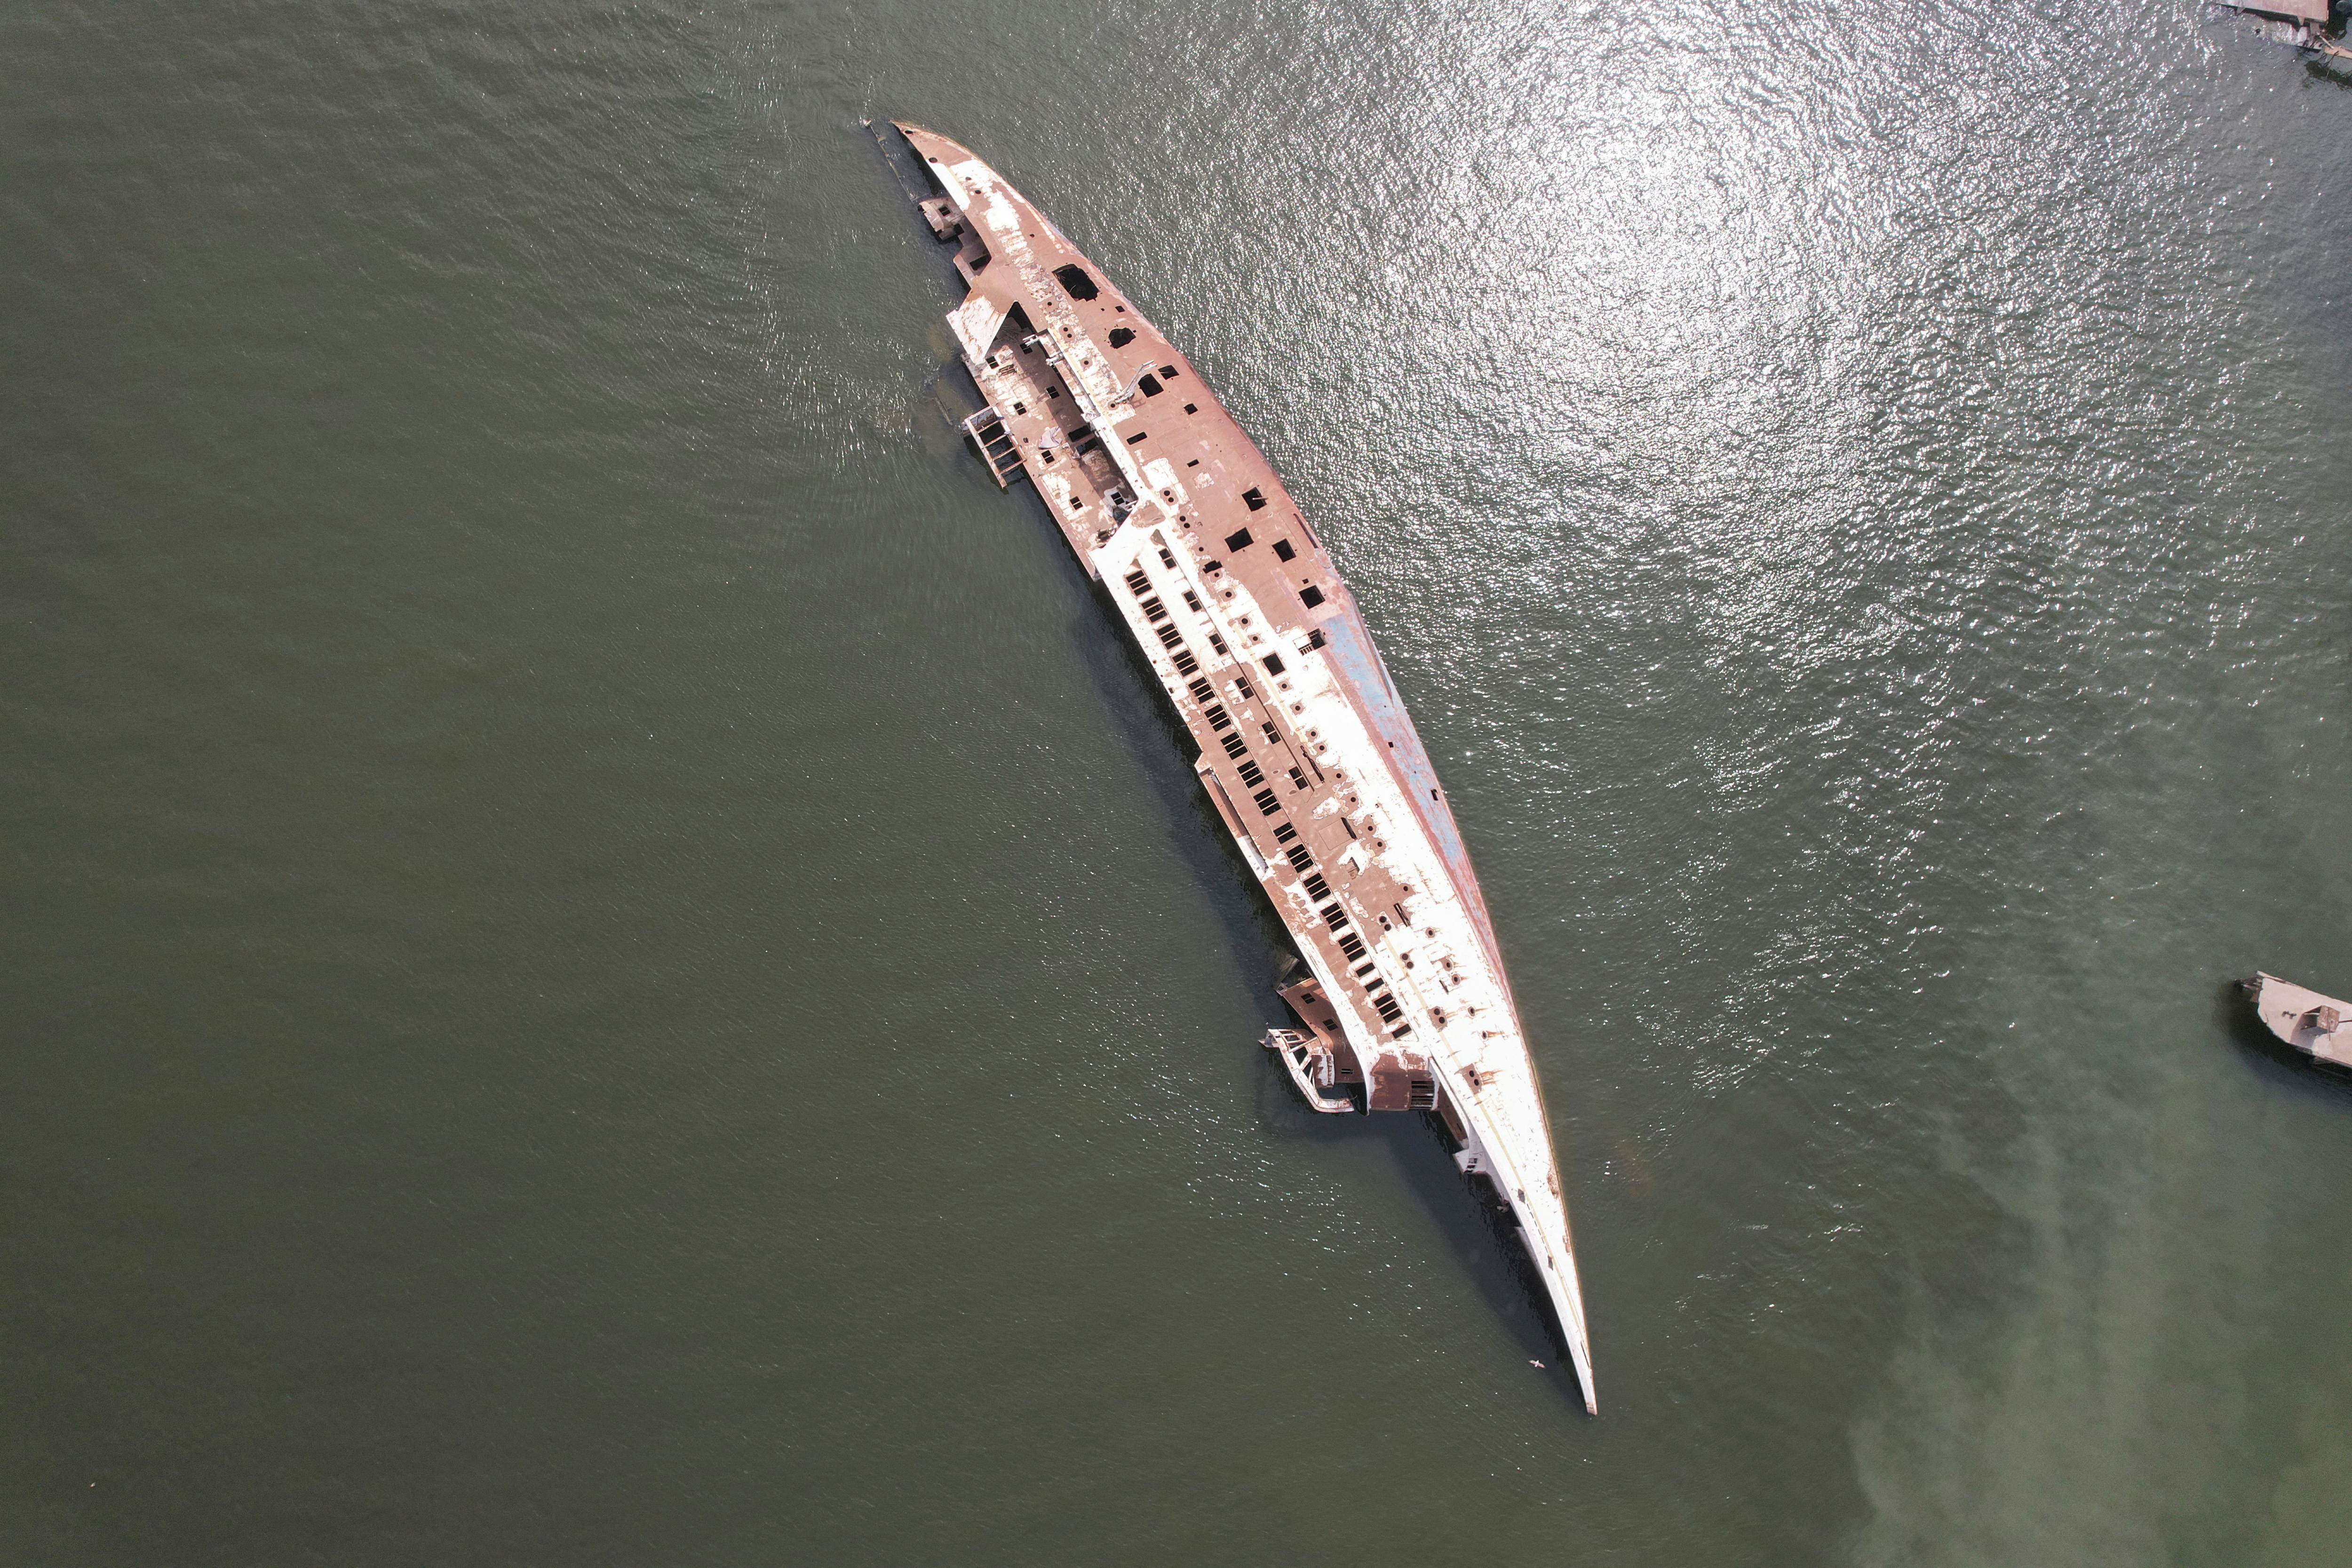 An aerial view of the 'Al-Mansur' yacht, once belonging to former Iraqi President Saddam Hussein, which has been lying on the water bed for years in the Shatt al-Arab waterway, in Basra